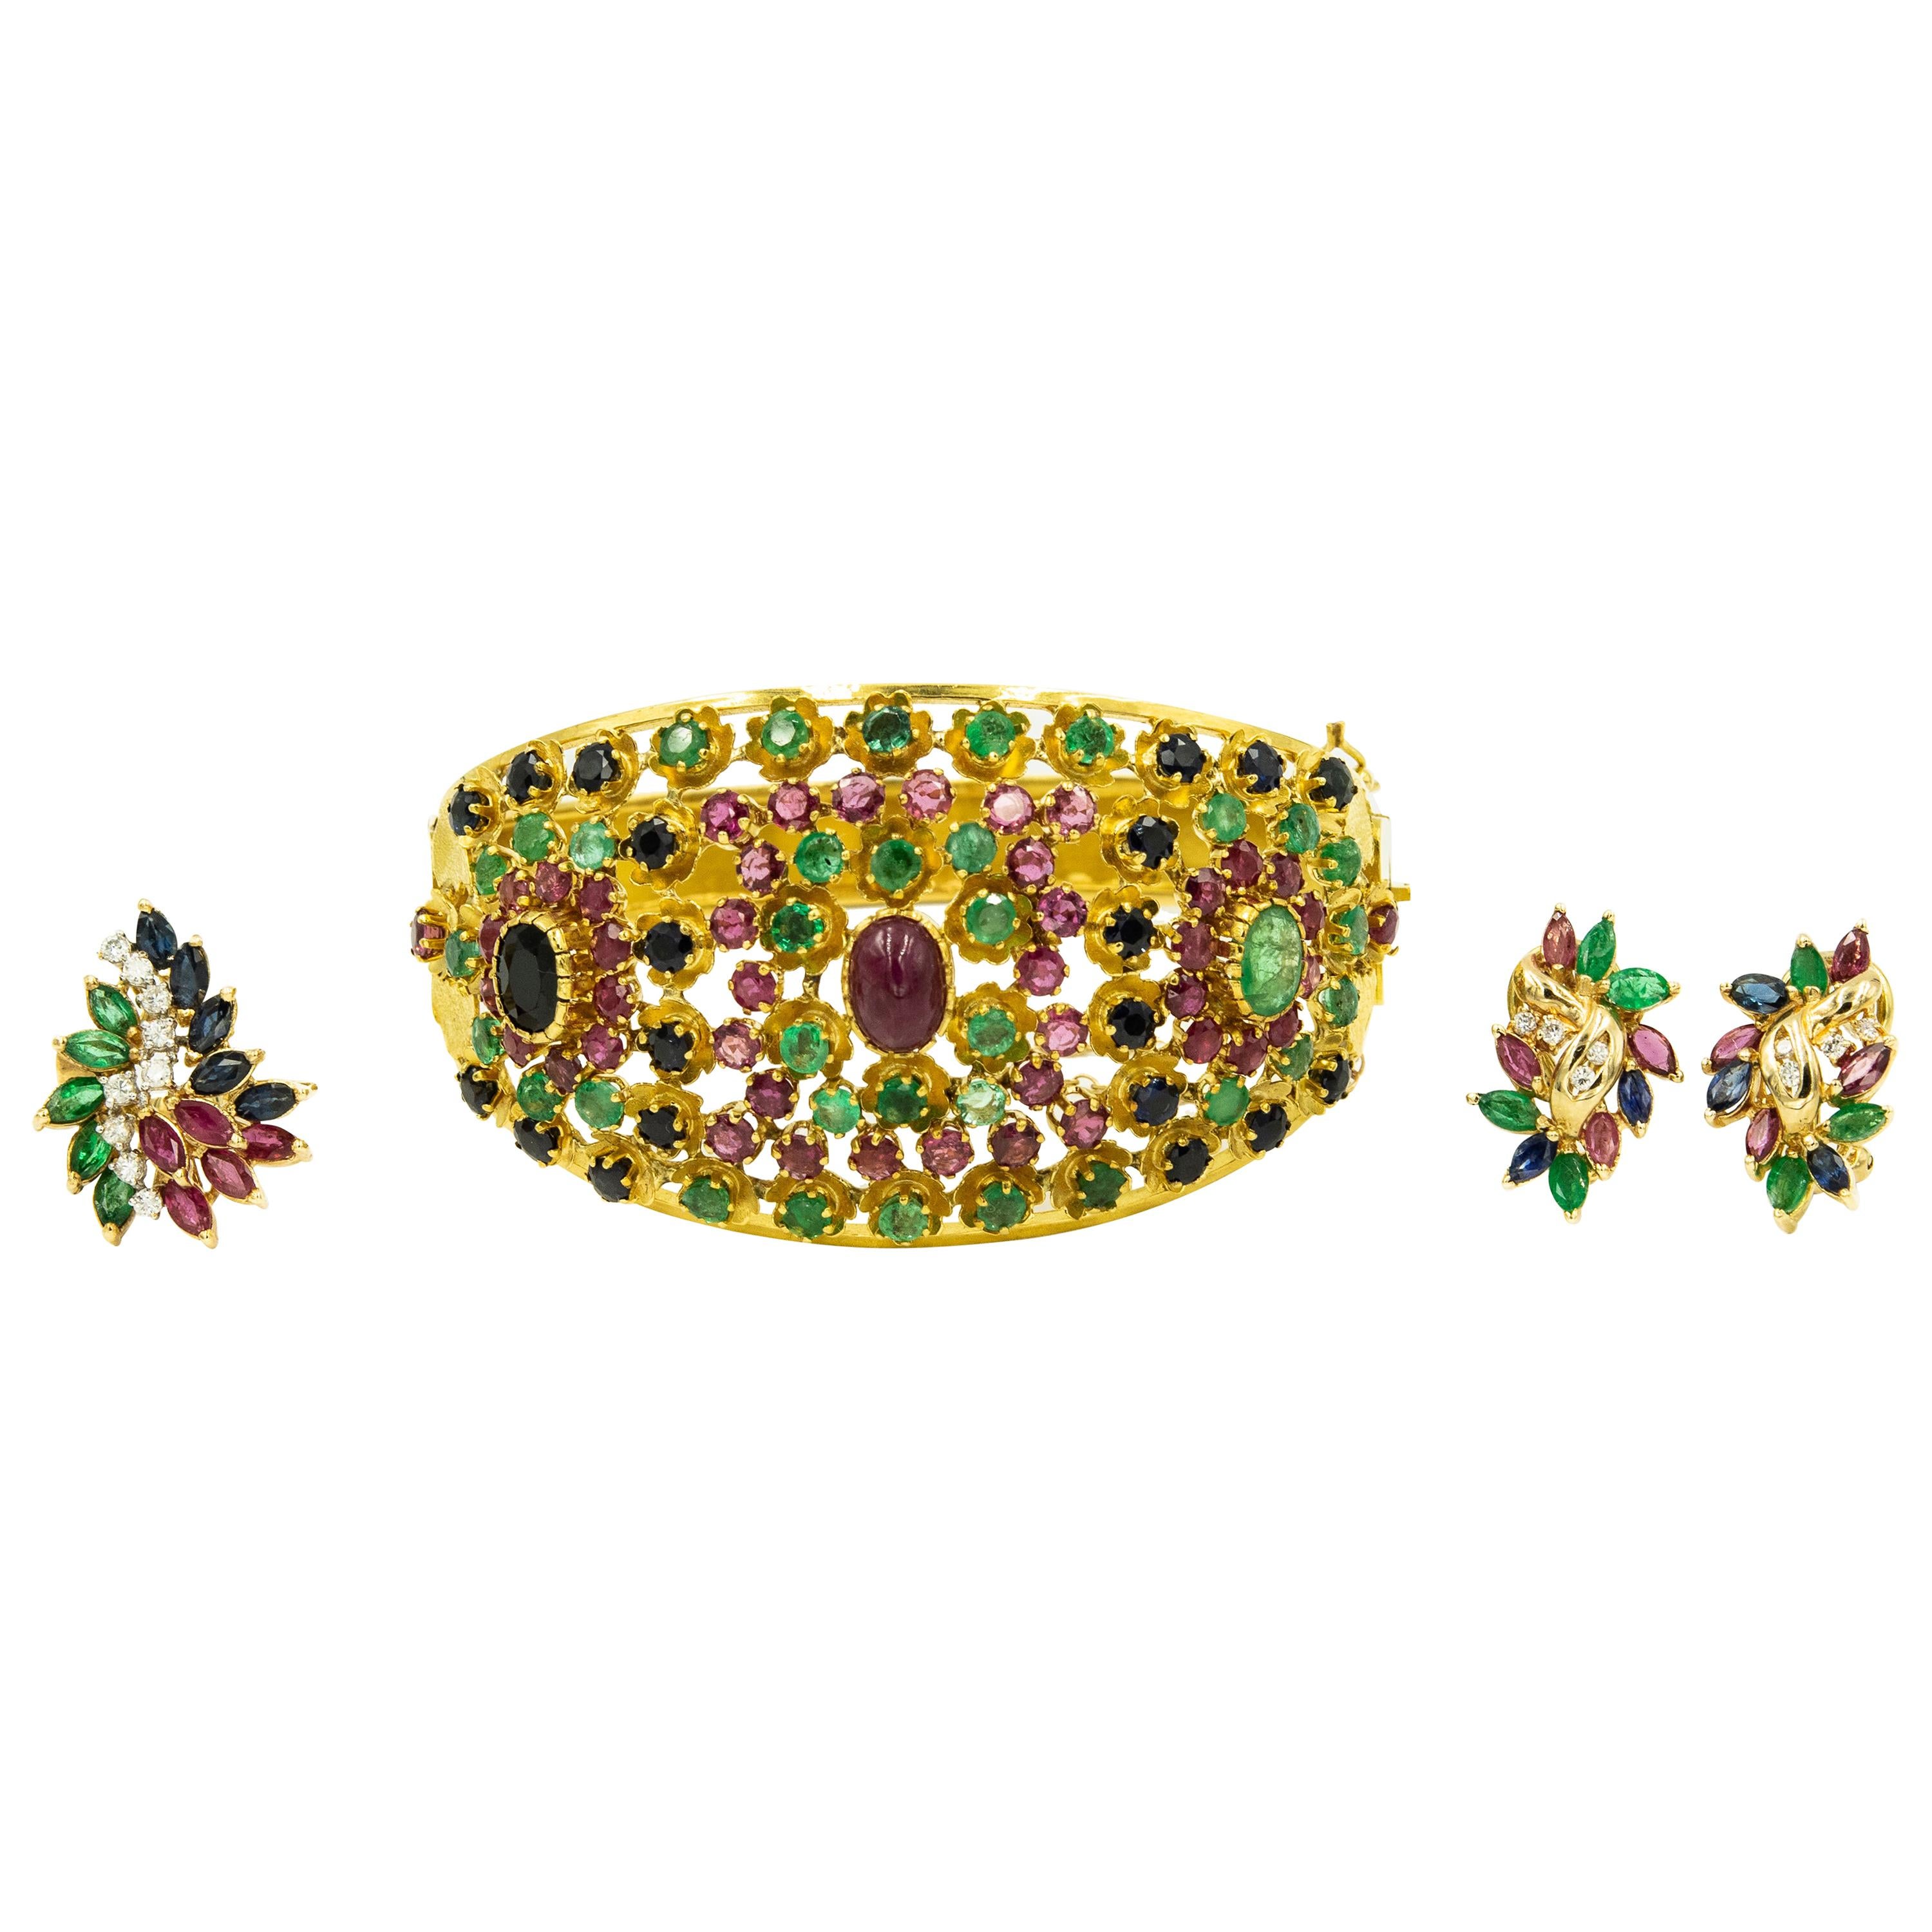 Emerald Ruby Sapphire Diamond Gold Suite Bangle Bracelet Earrings and Ring